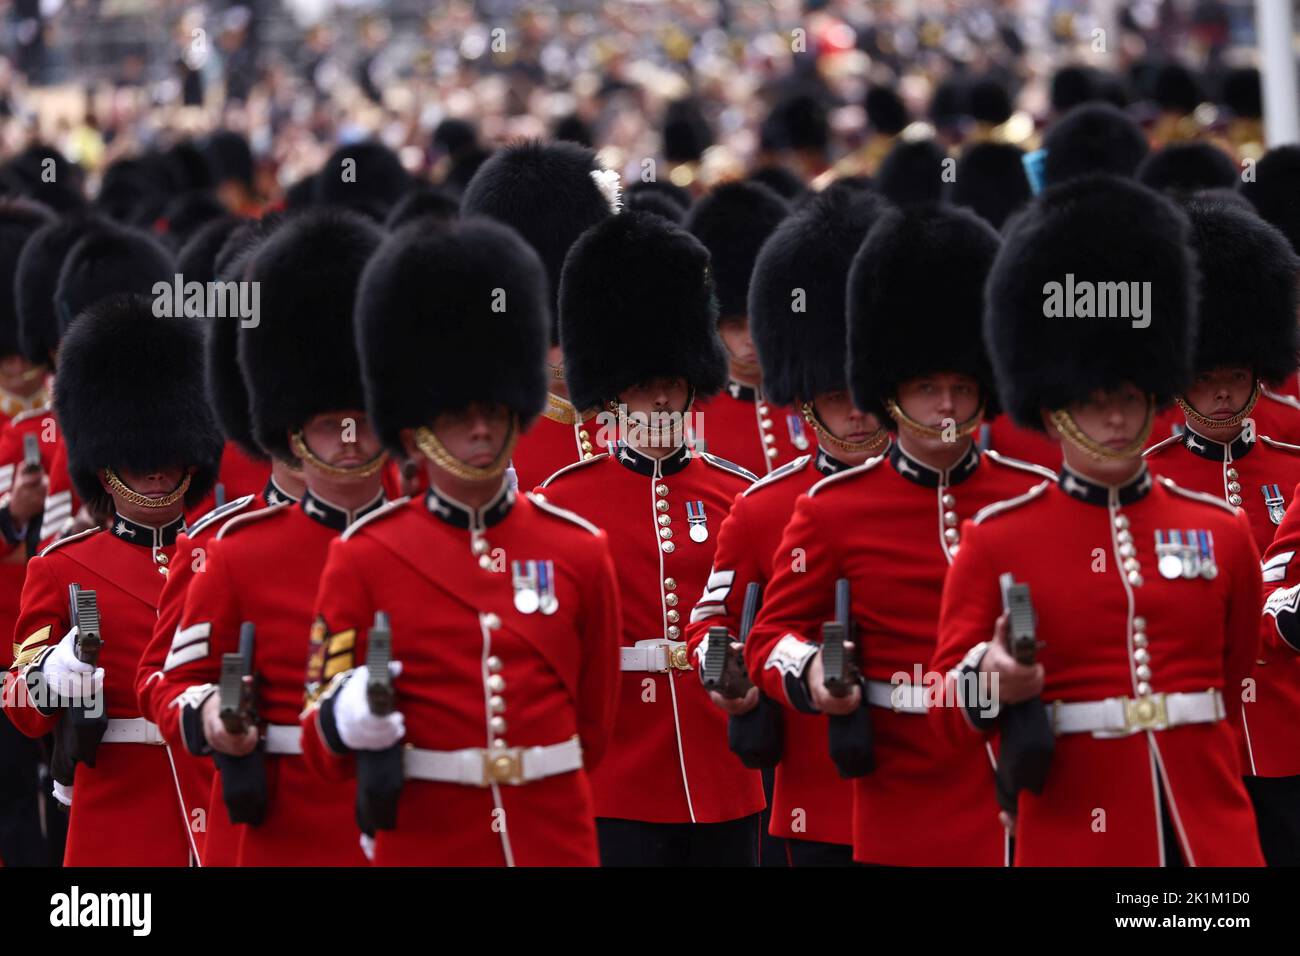 Guards participate in the procession on the day of the state funeral and burial of Britain's Queen Elizabeth, in London, Britain, September 19, 2022. REUTERS/Tom Nicholson? Stock Photo